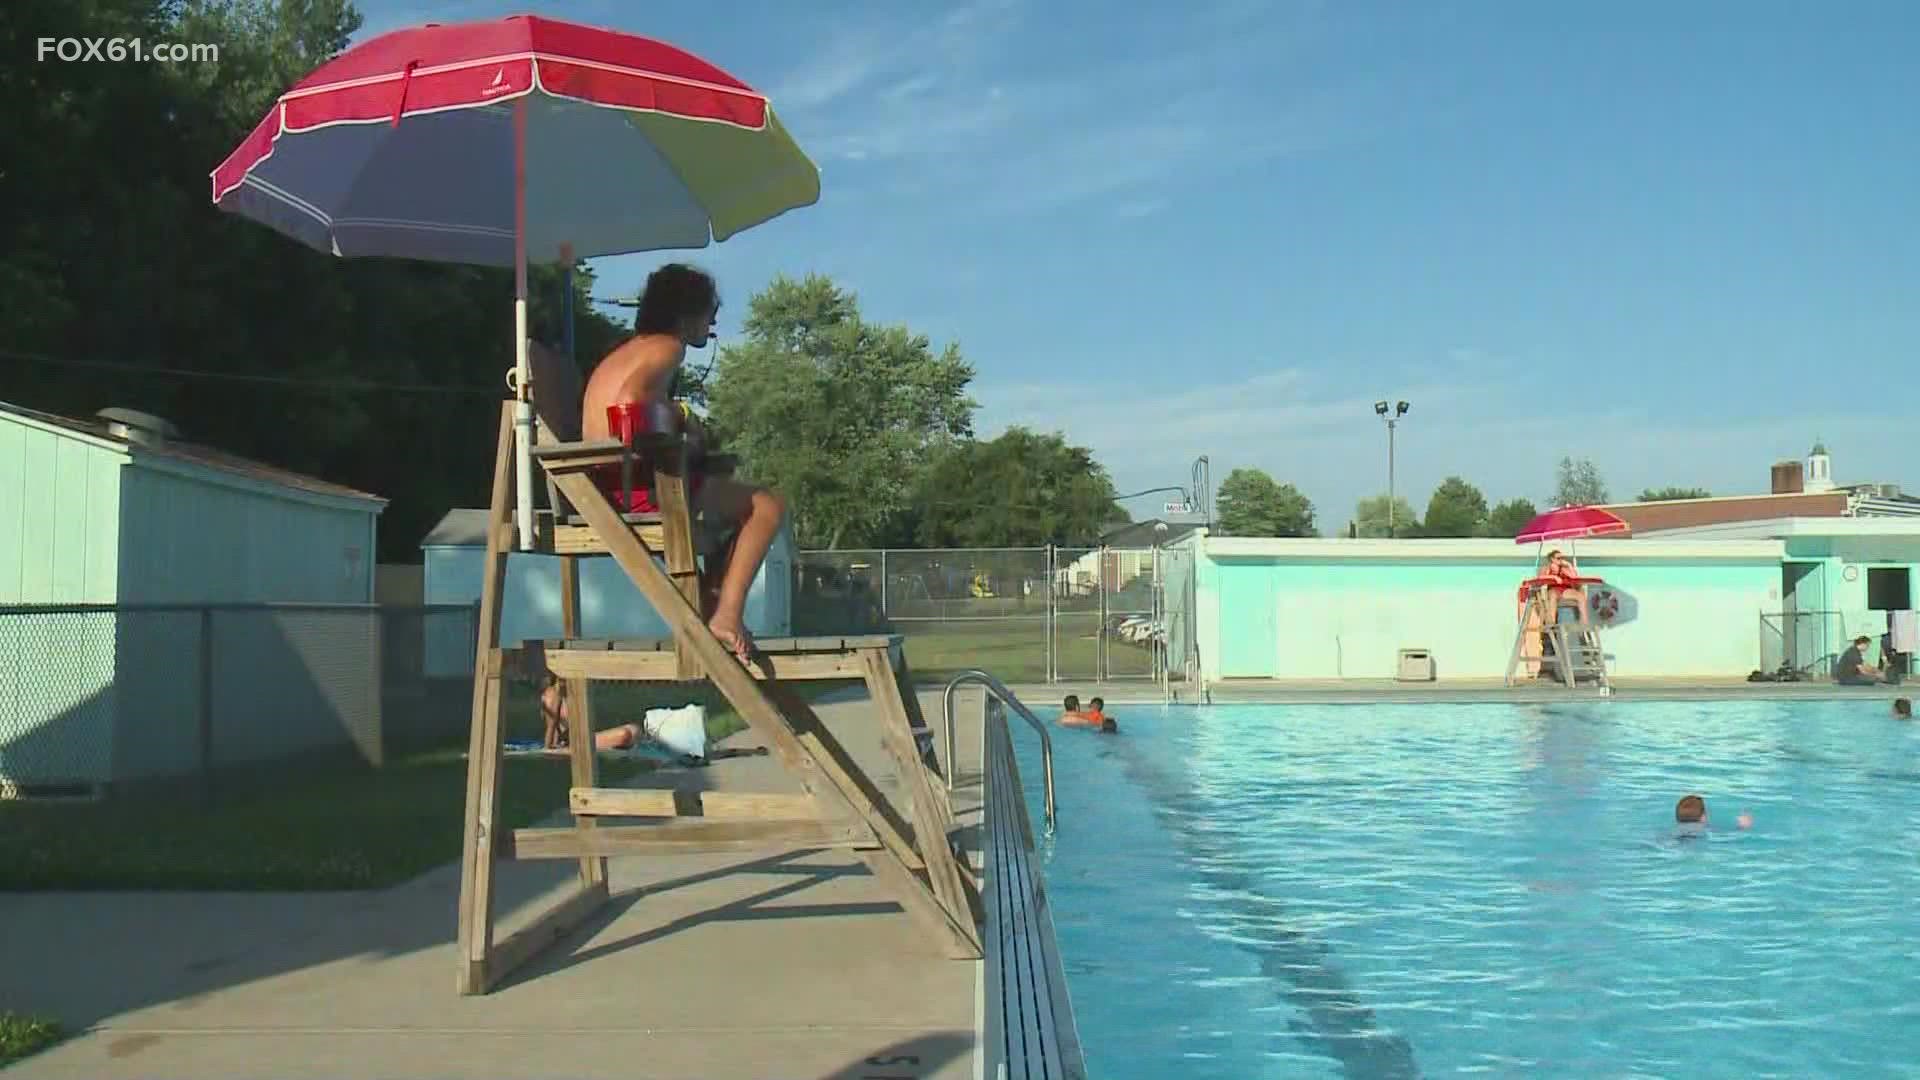 Providence extends water park, pool hours due to extreme heat in forecast